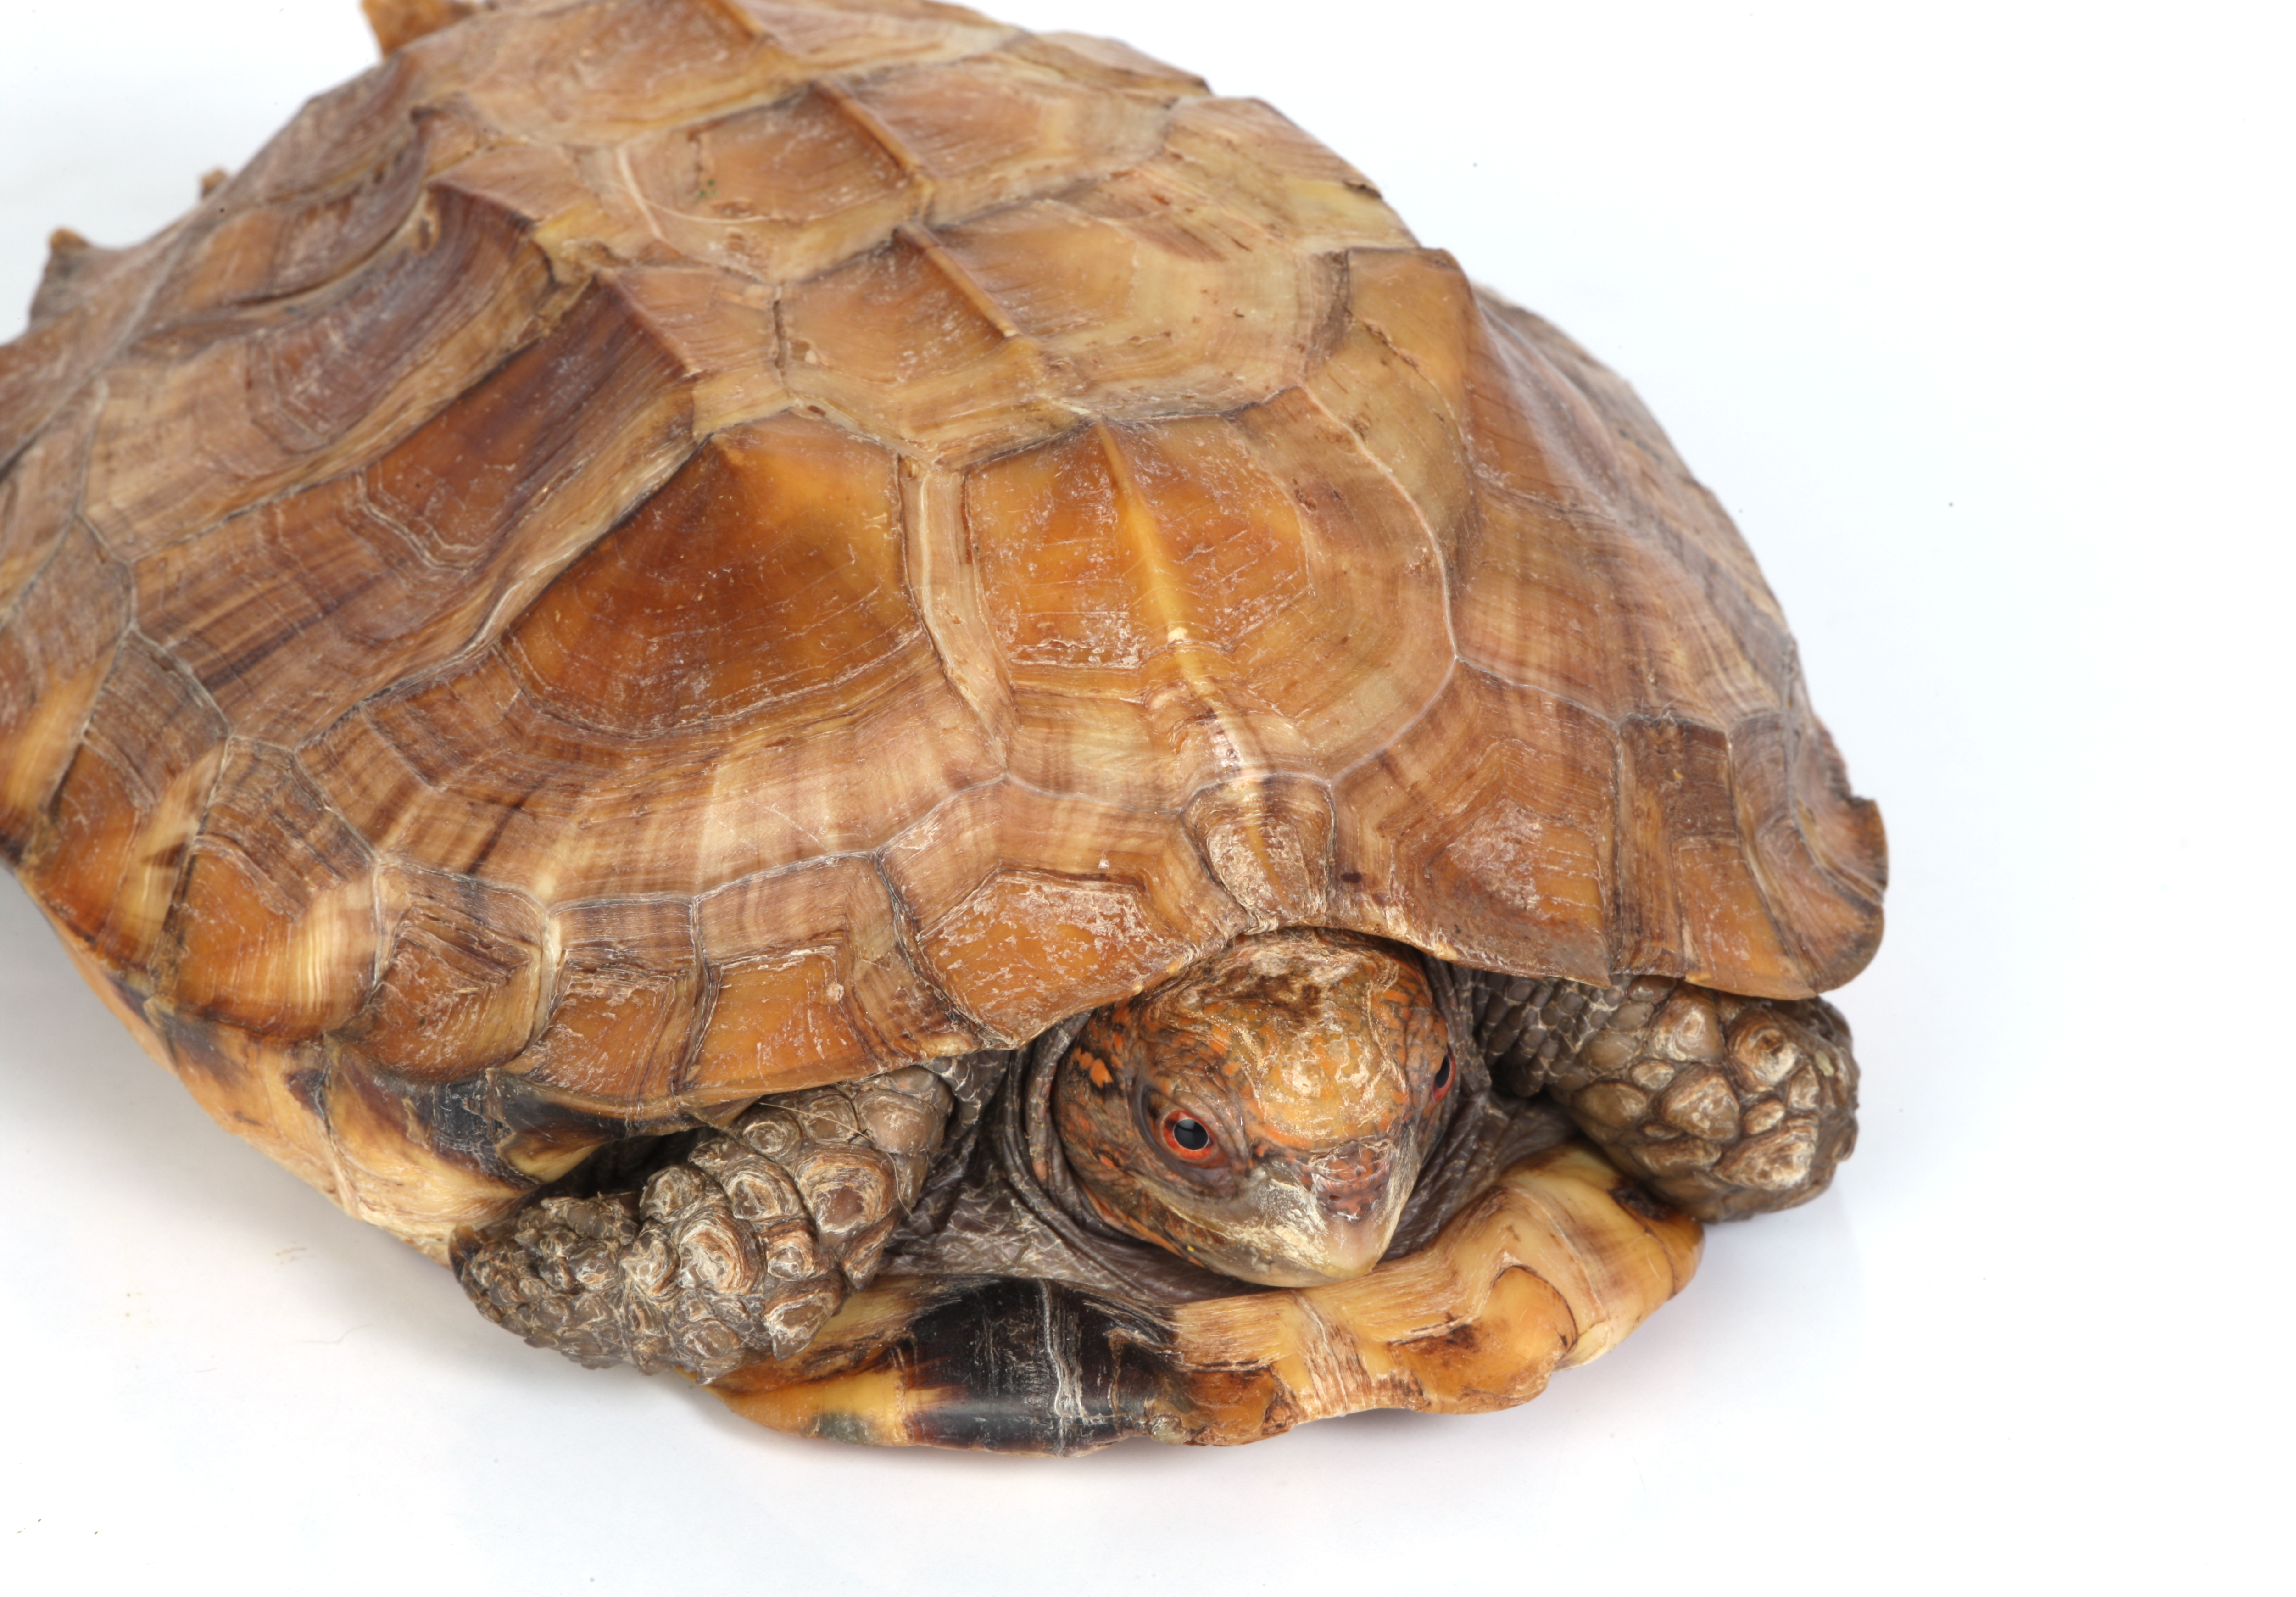 Image of a tortoise.